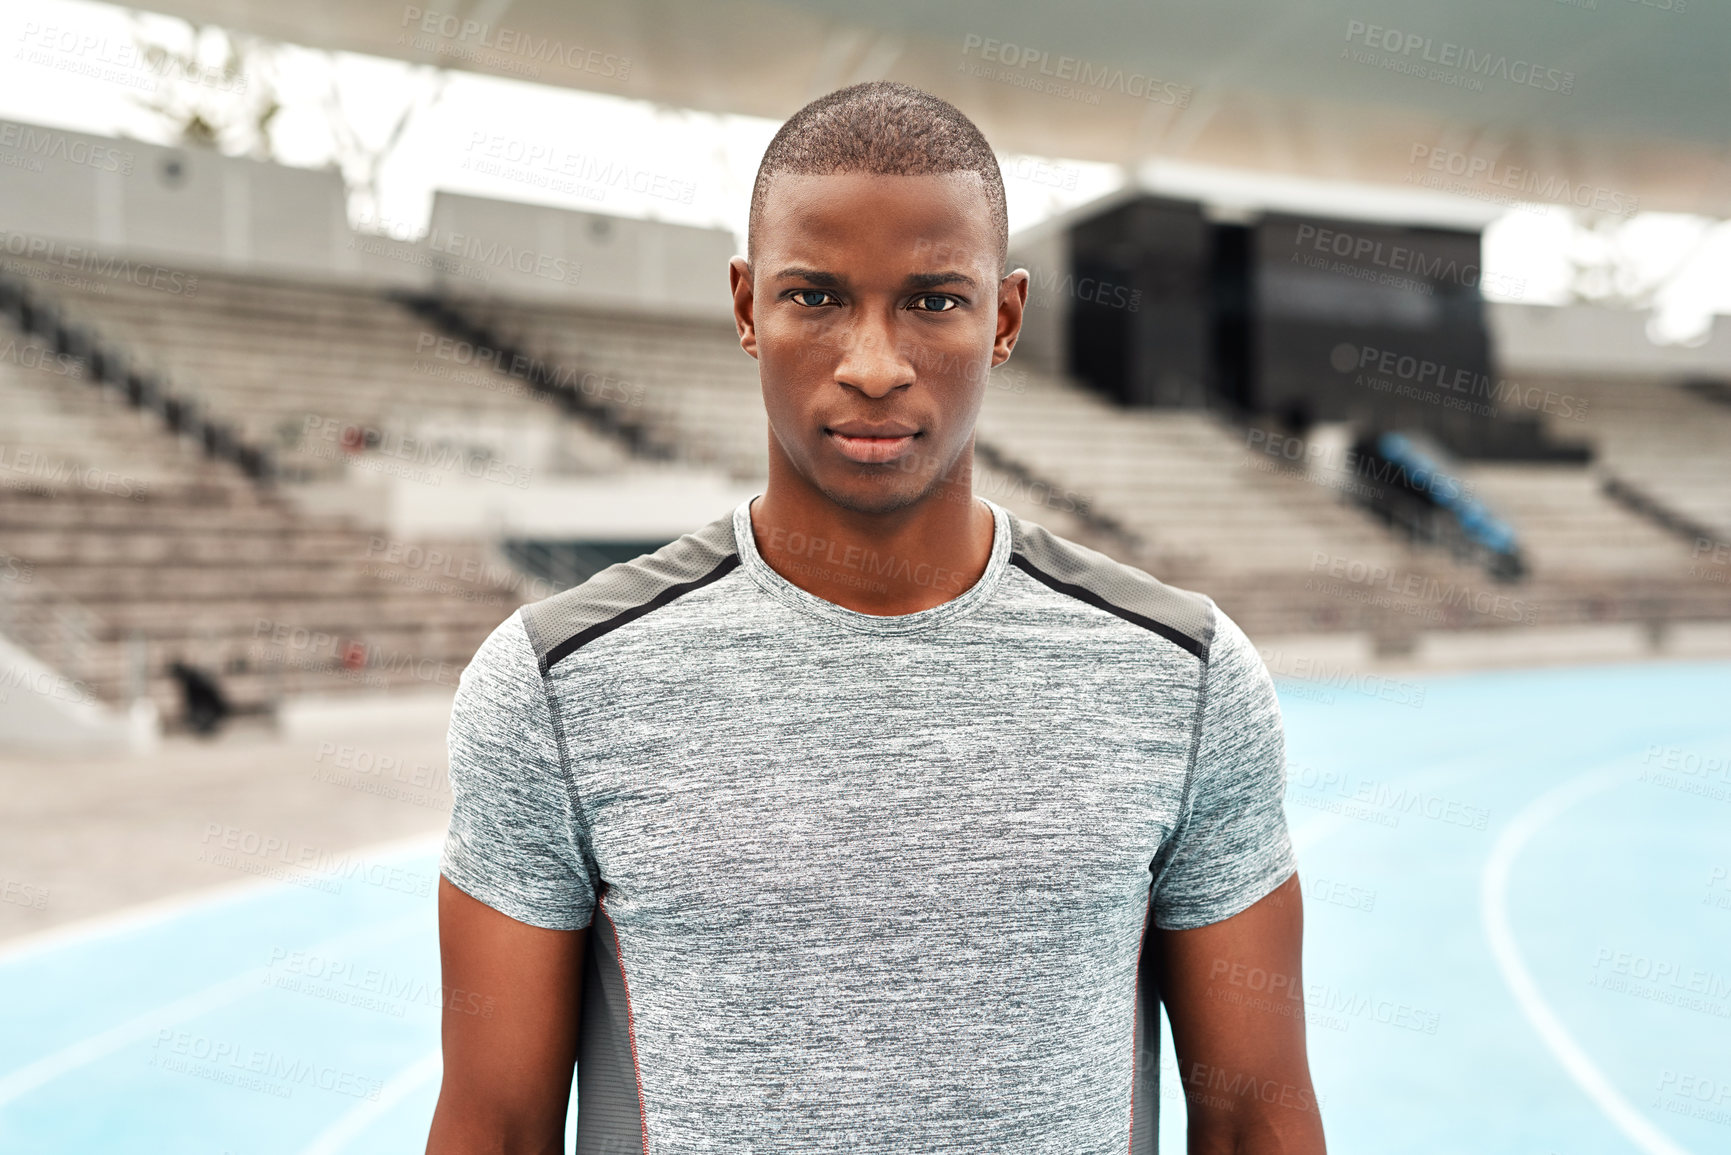 Buy stock photo Cropped portrait of a handsome young athlete standing alone before going for a run on a track field